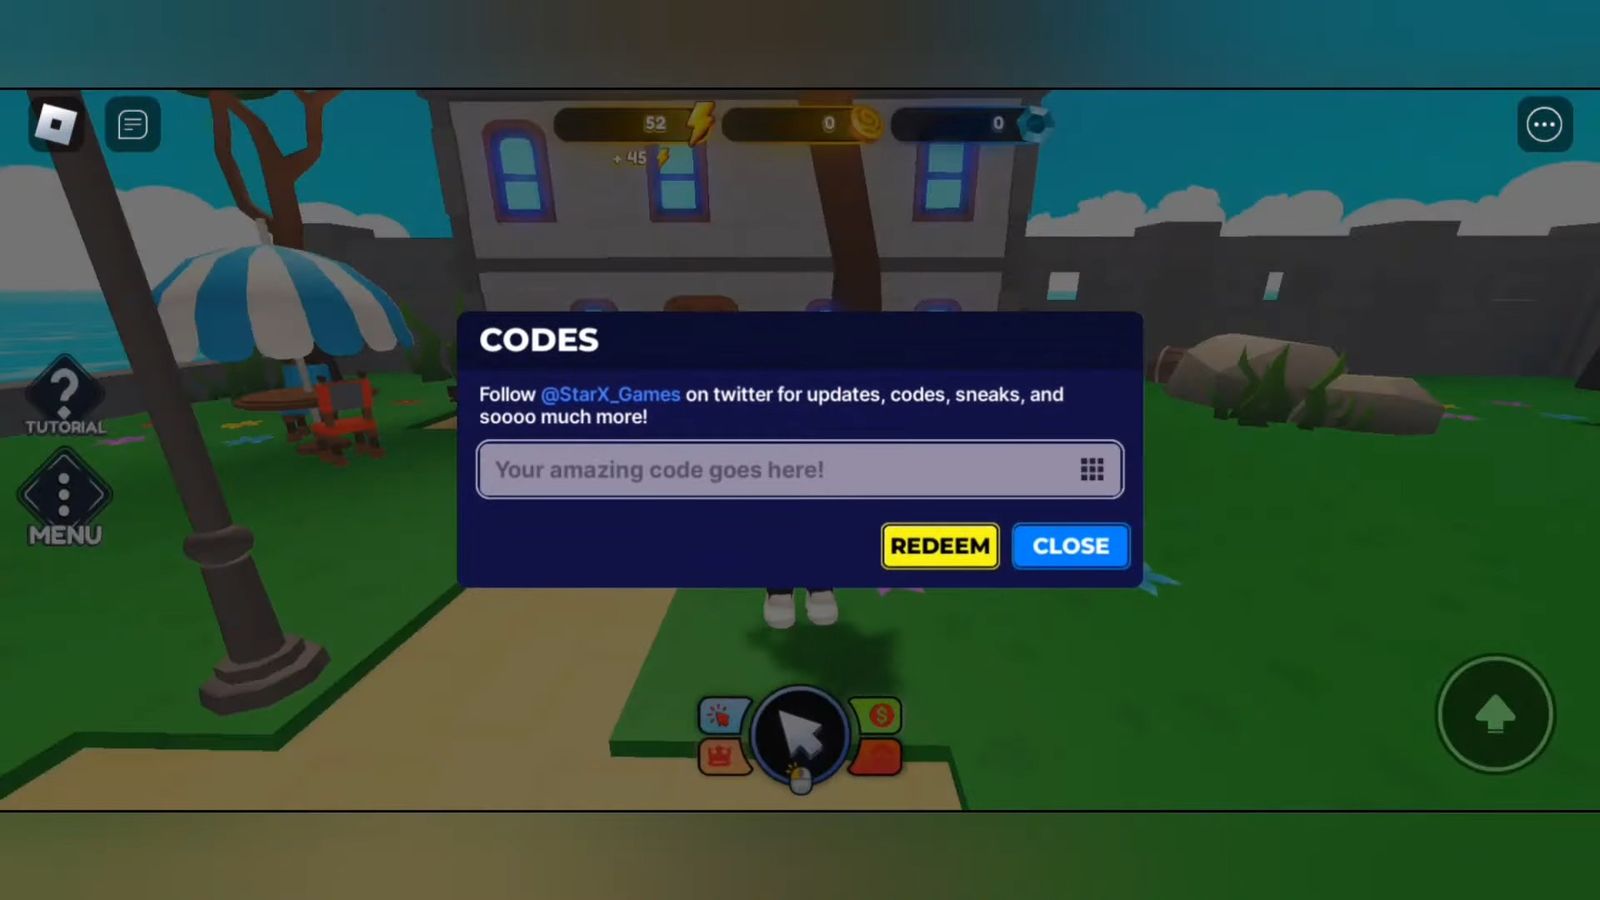 The code redemption page for Anime Catching Simulator